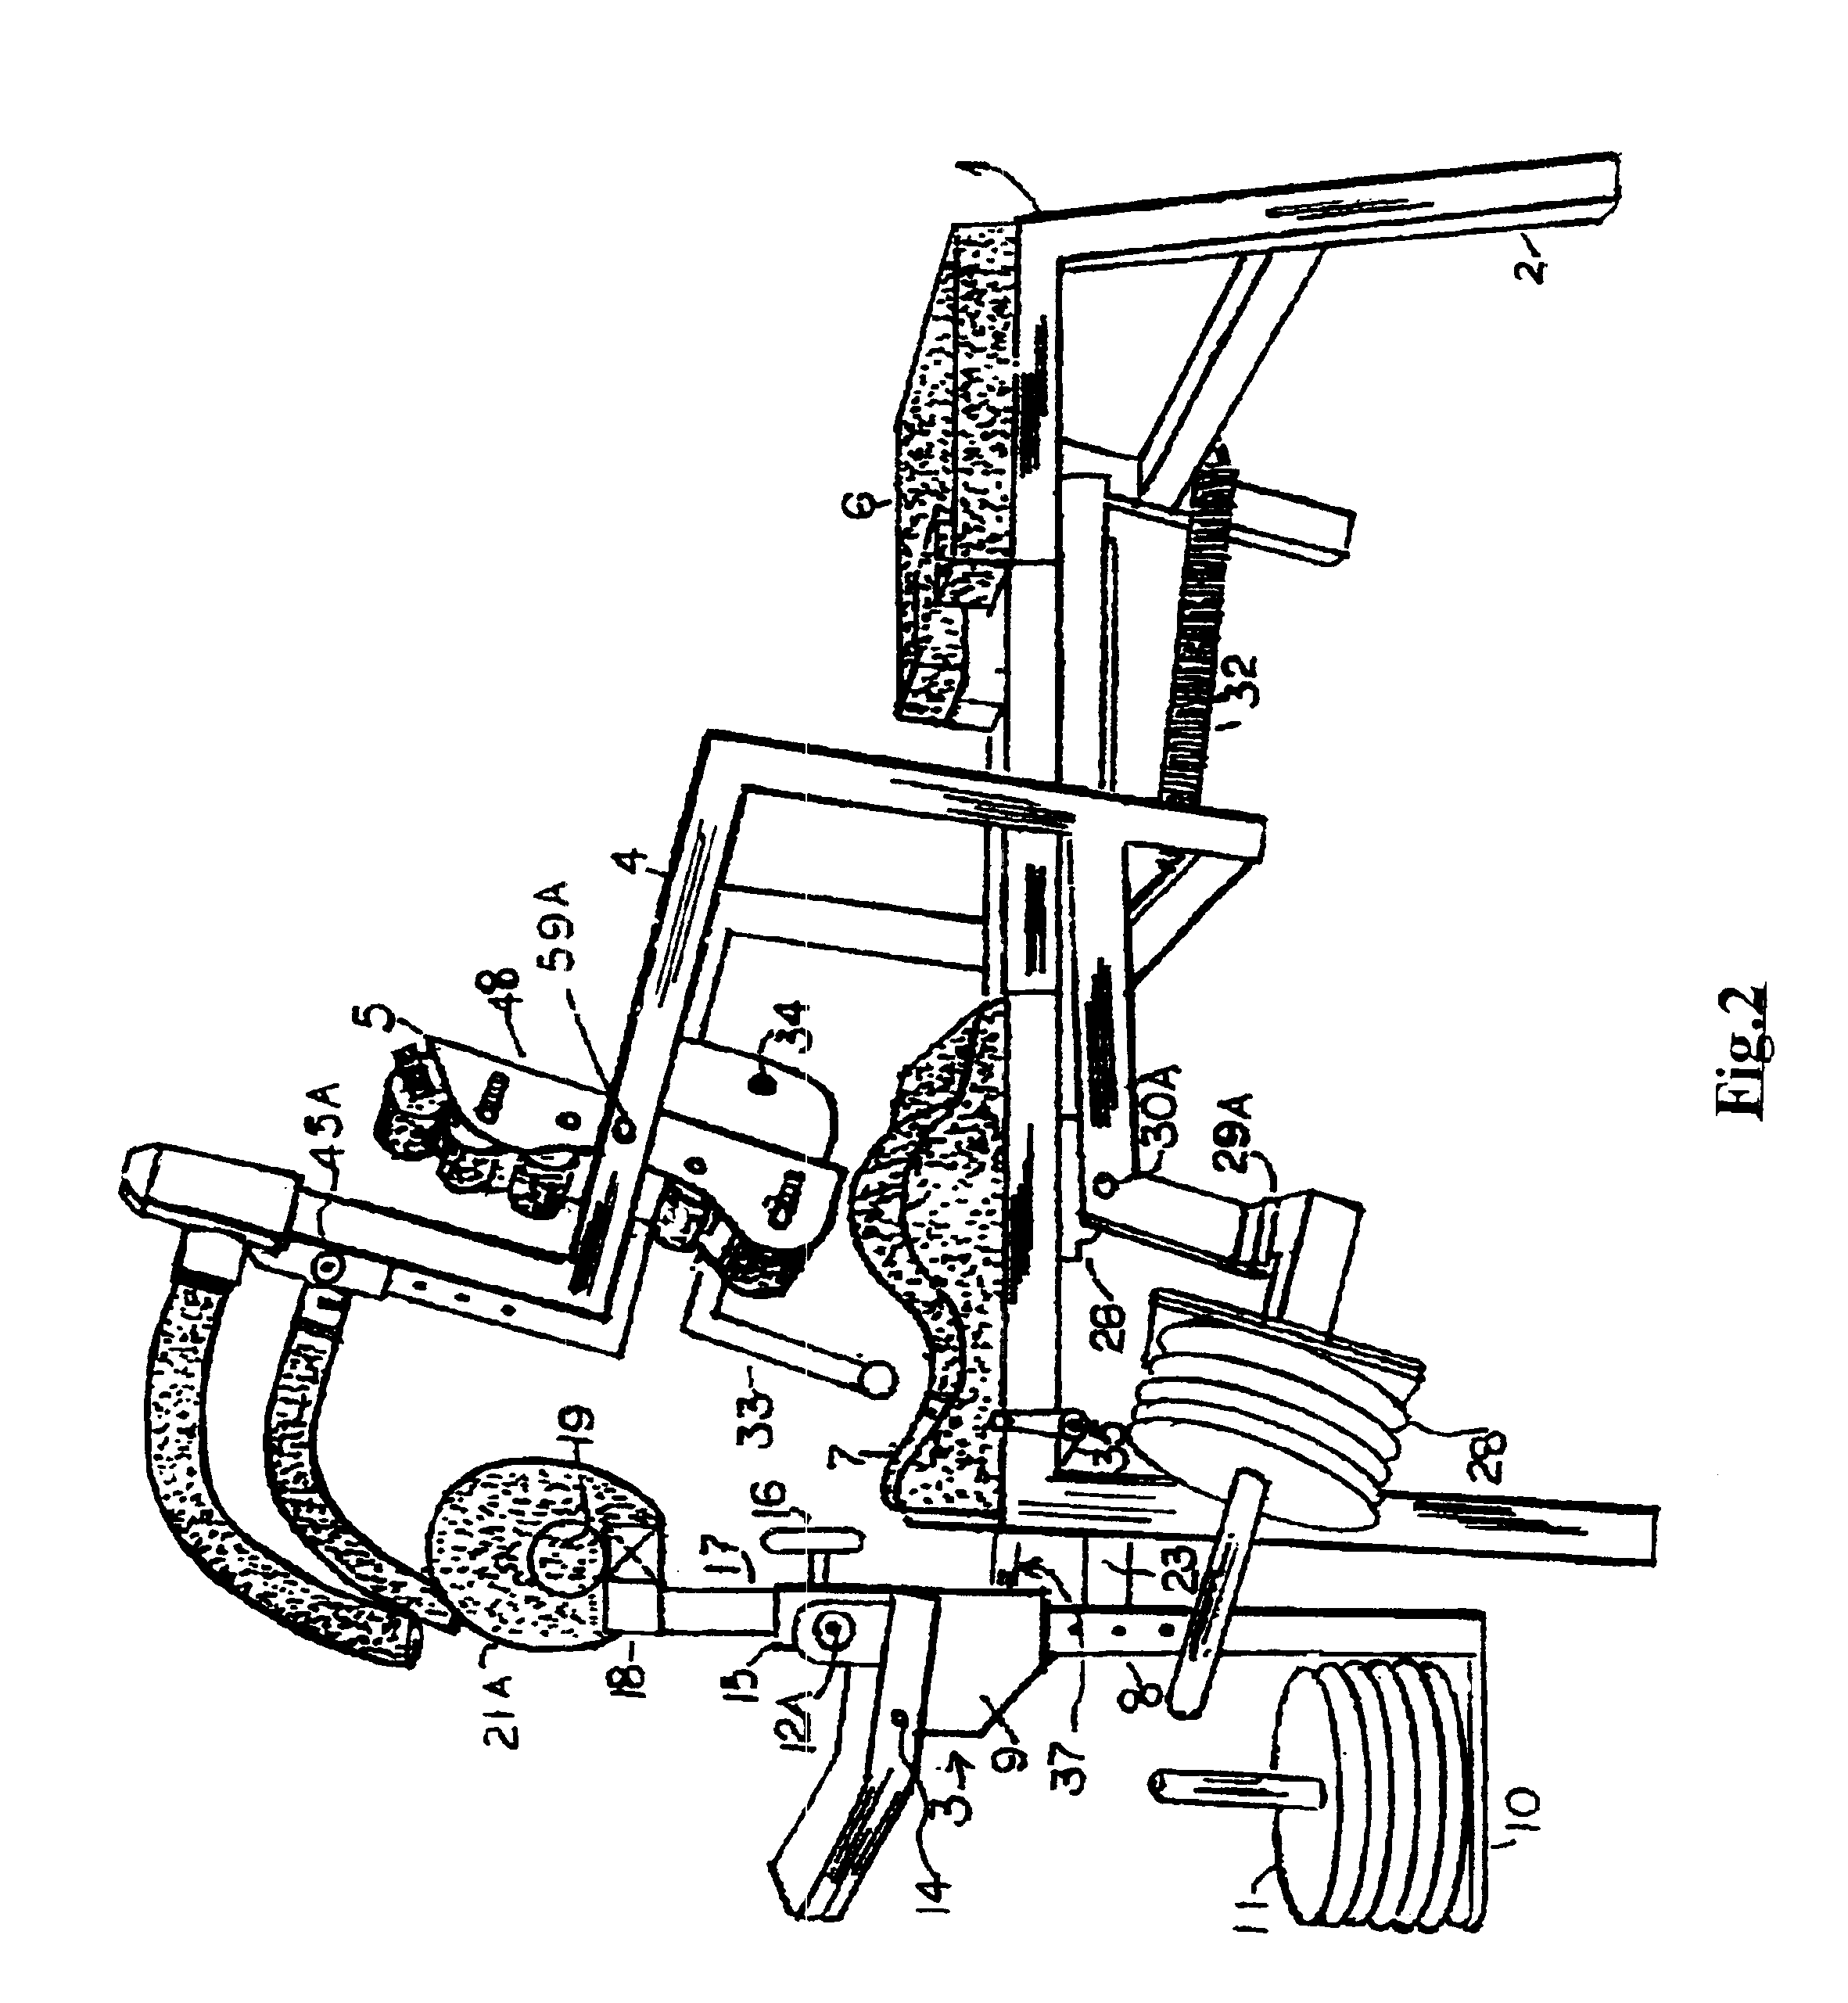 Combined therapeutic exercise apparatus for the back